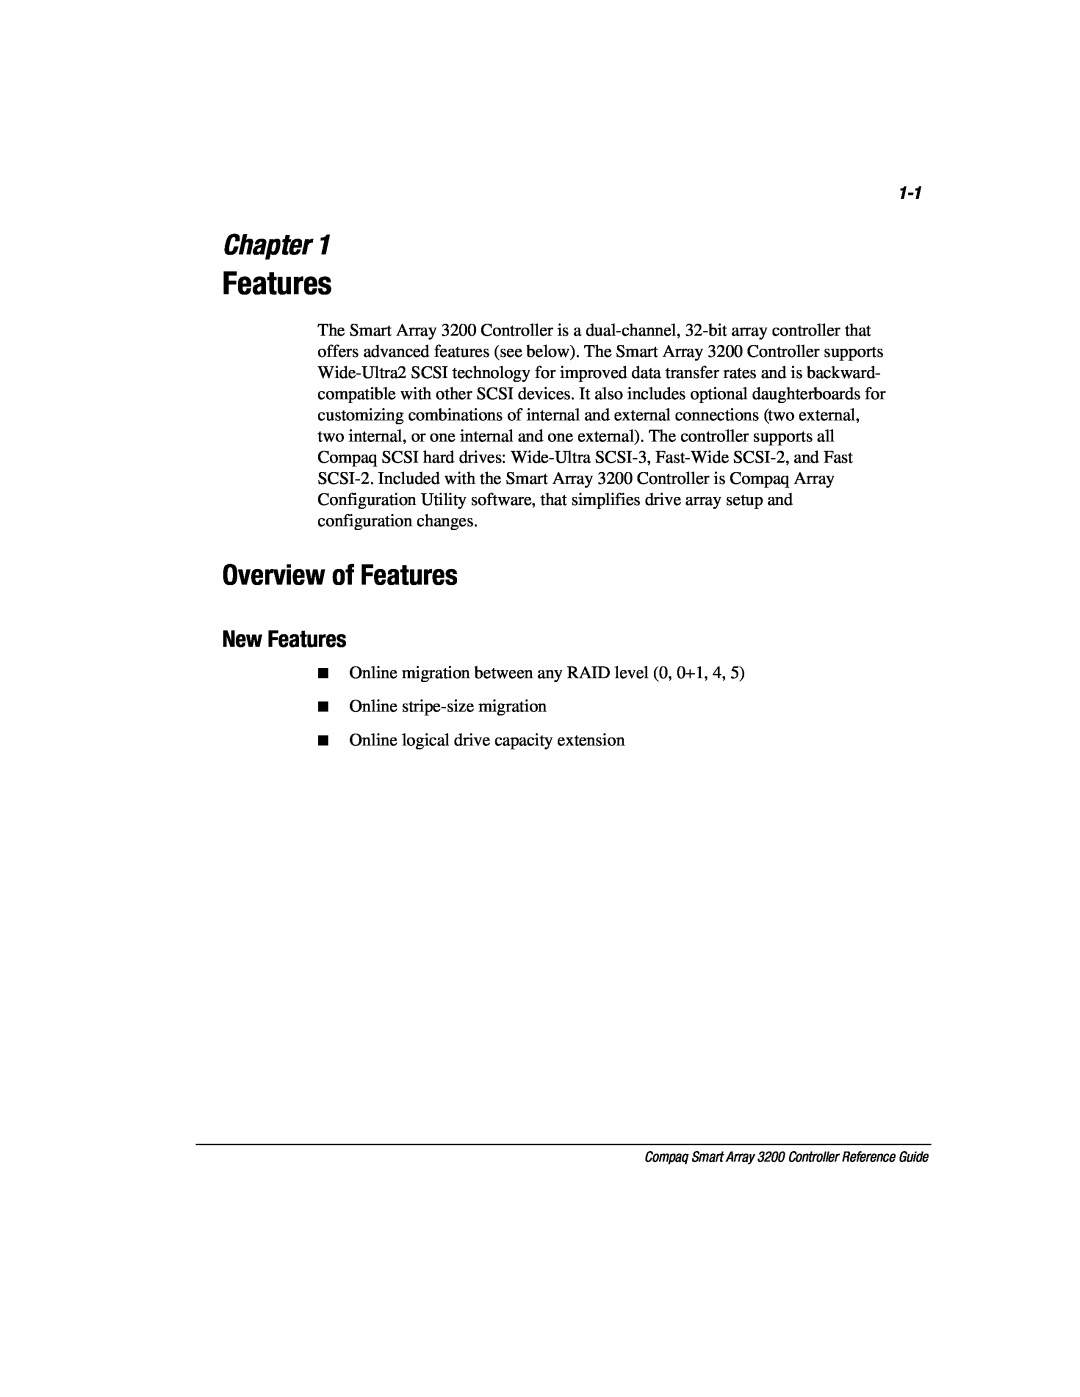 Compaq 3200 manual Chapter, Overview of Features, New Features 